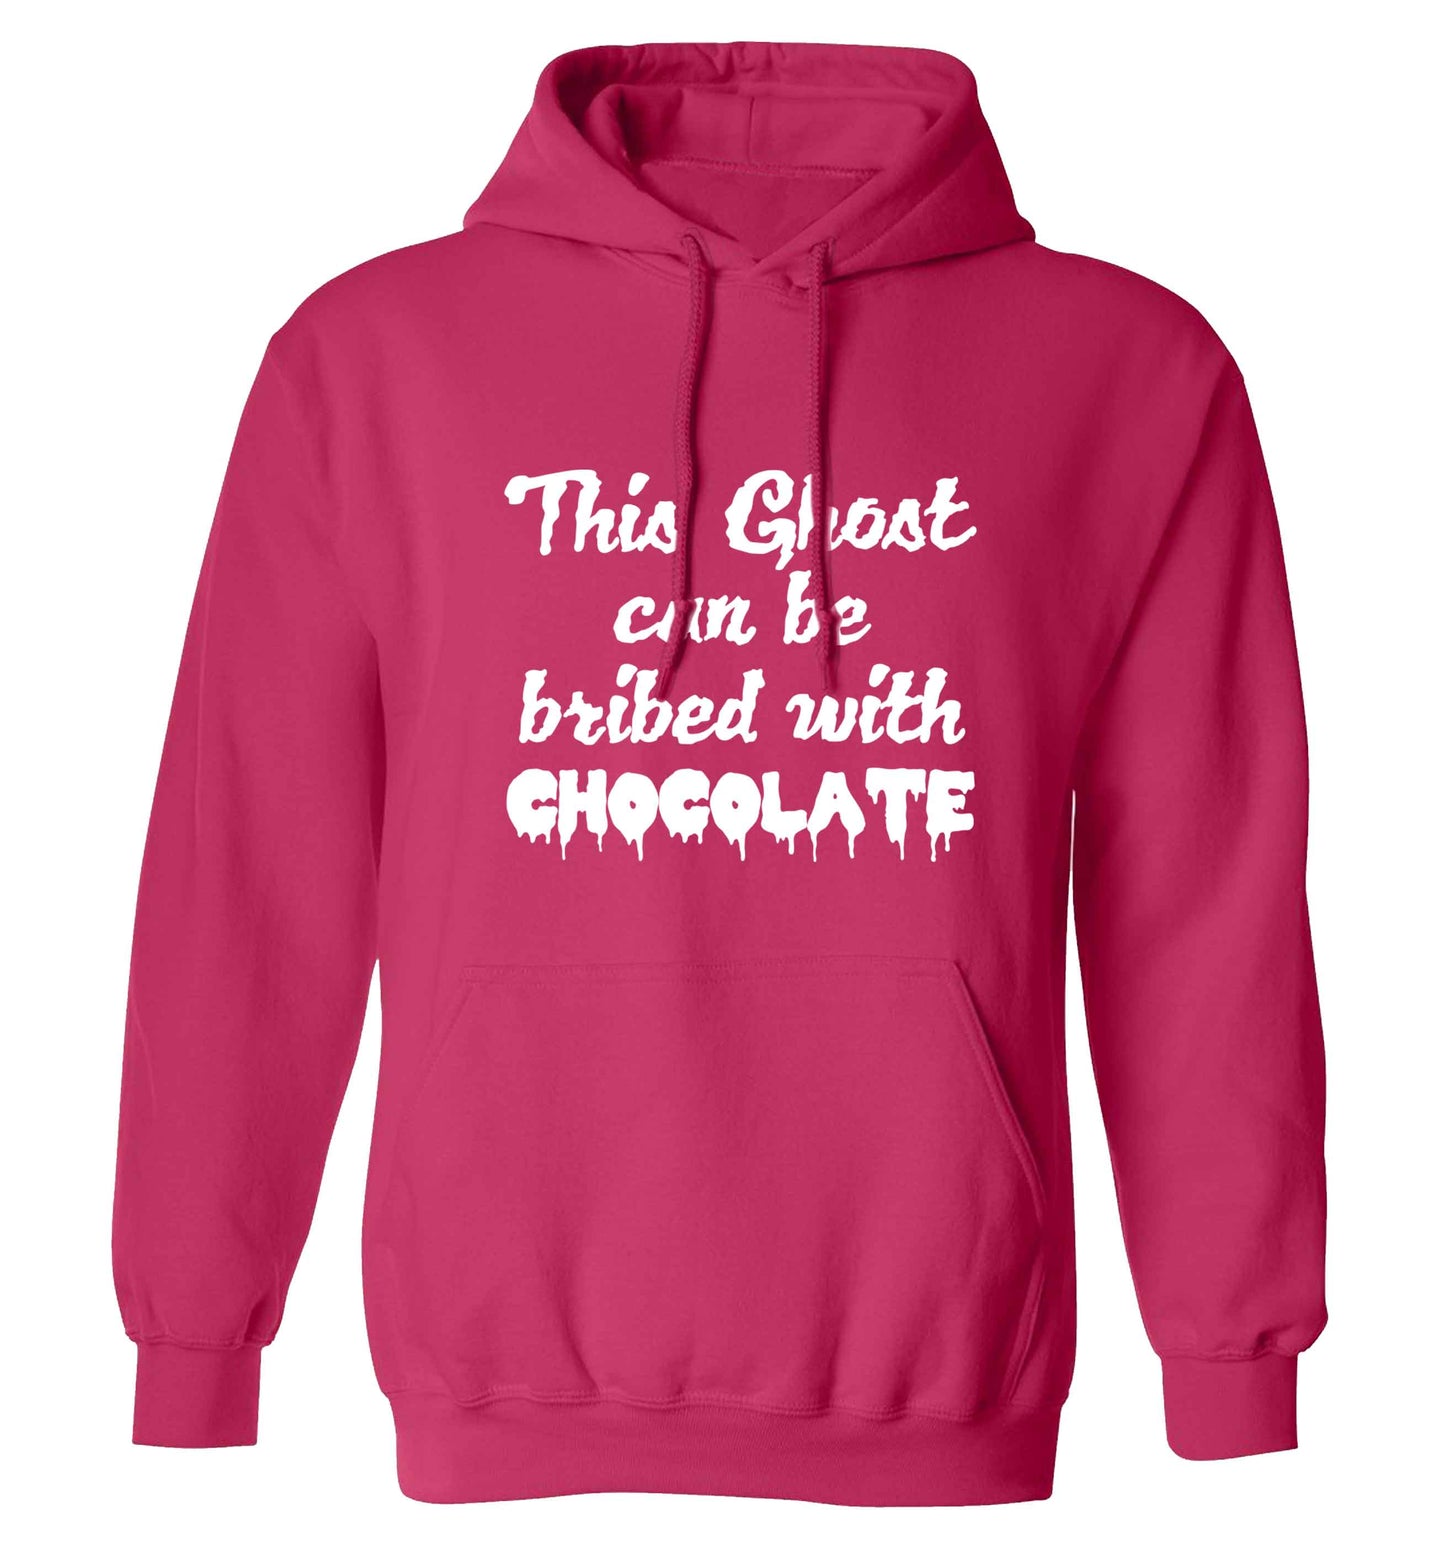 This ghost can be bribed with chocolate adults unisex pink hoodie 2XL